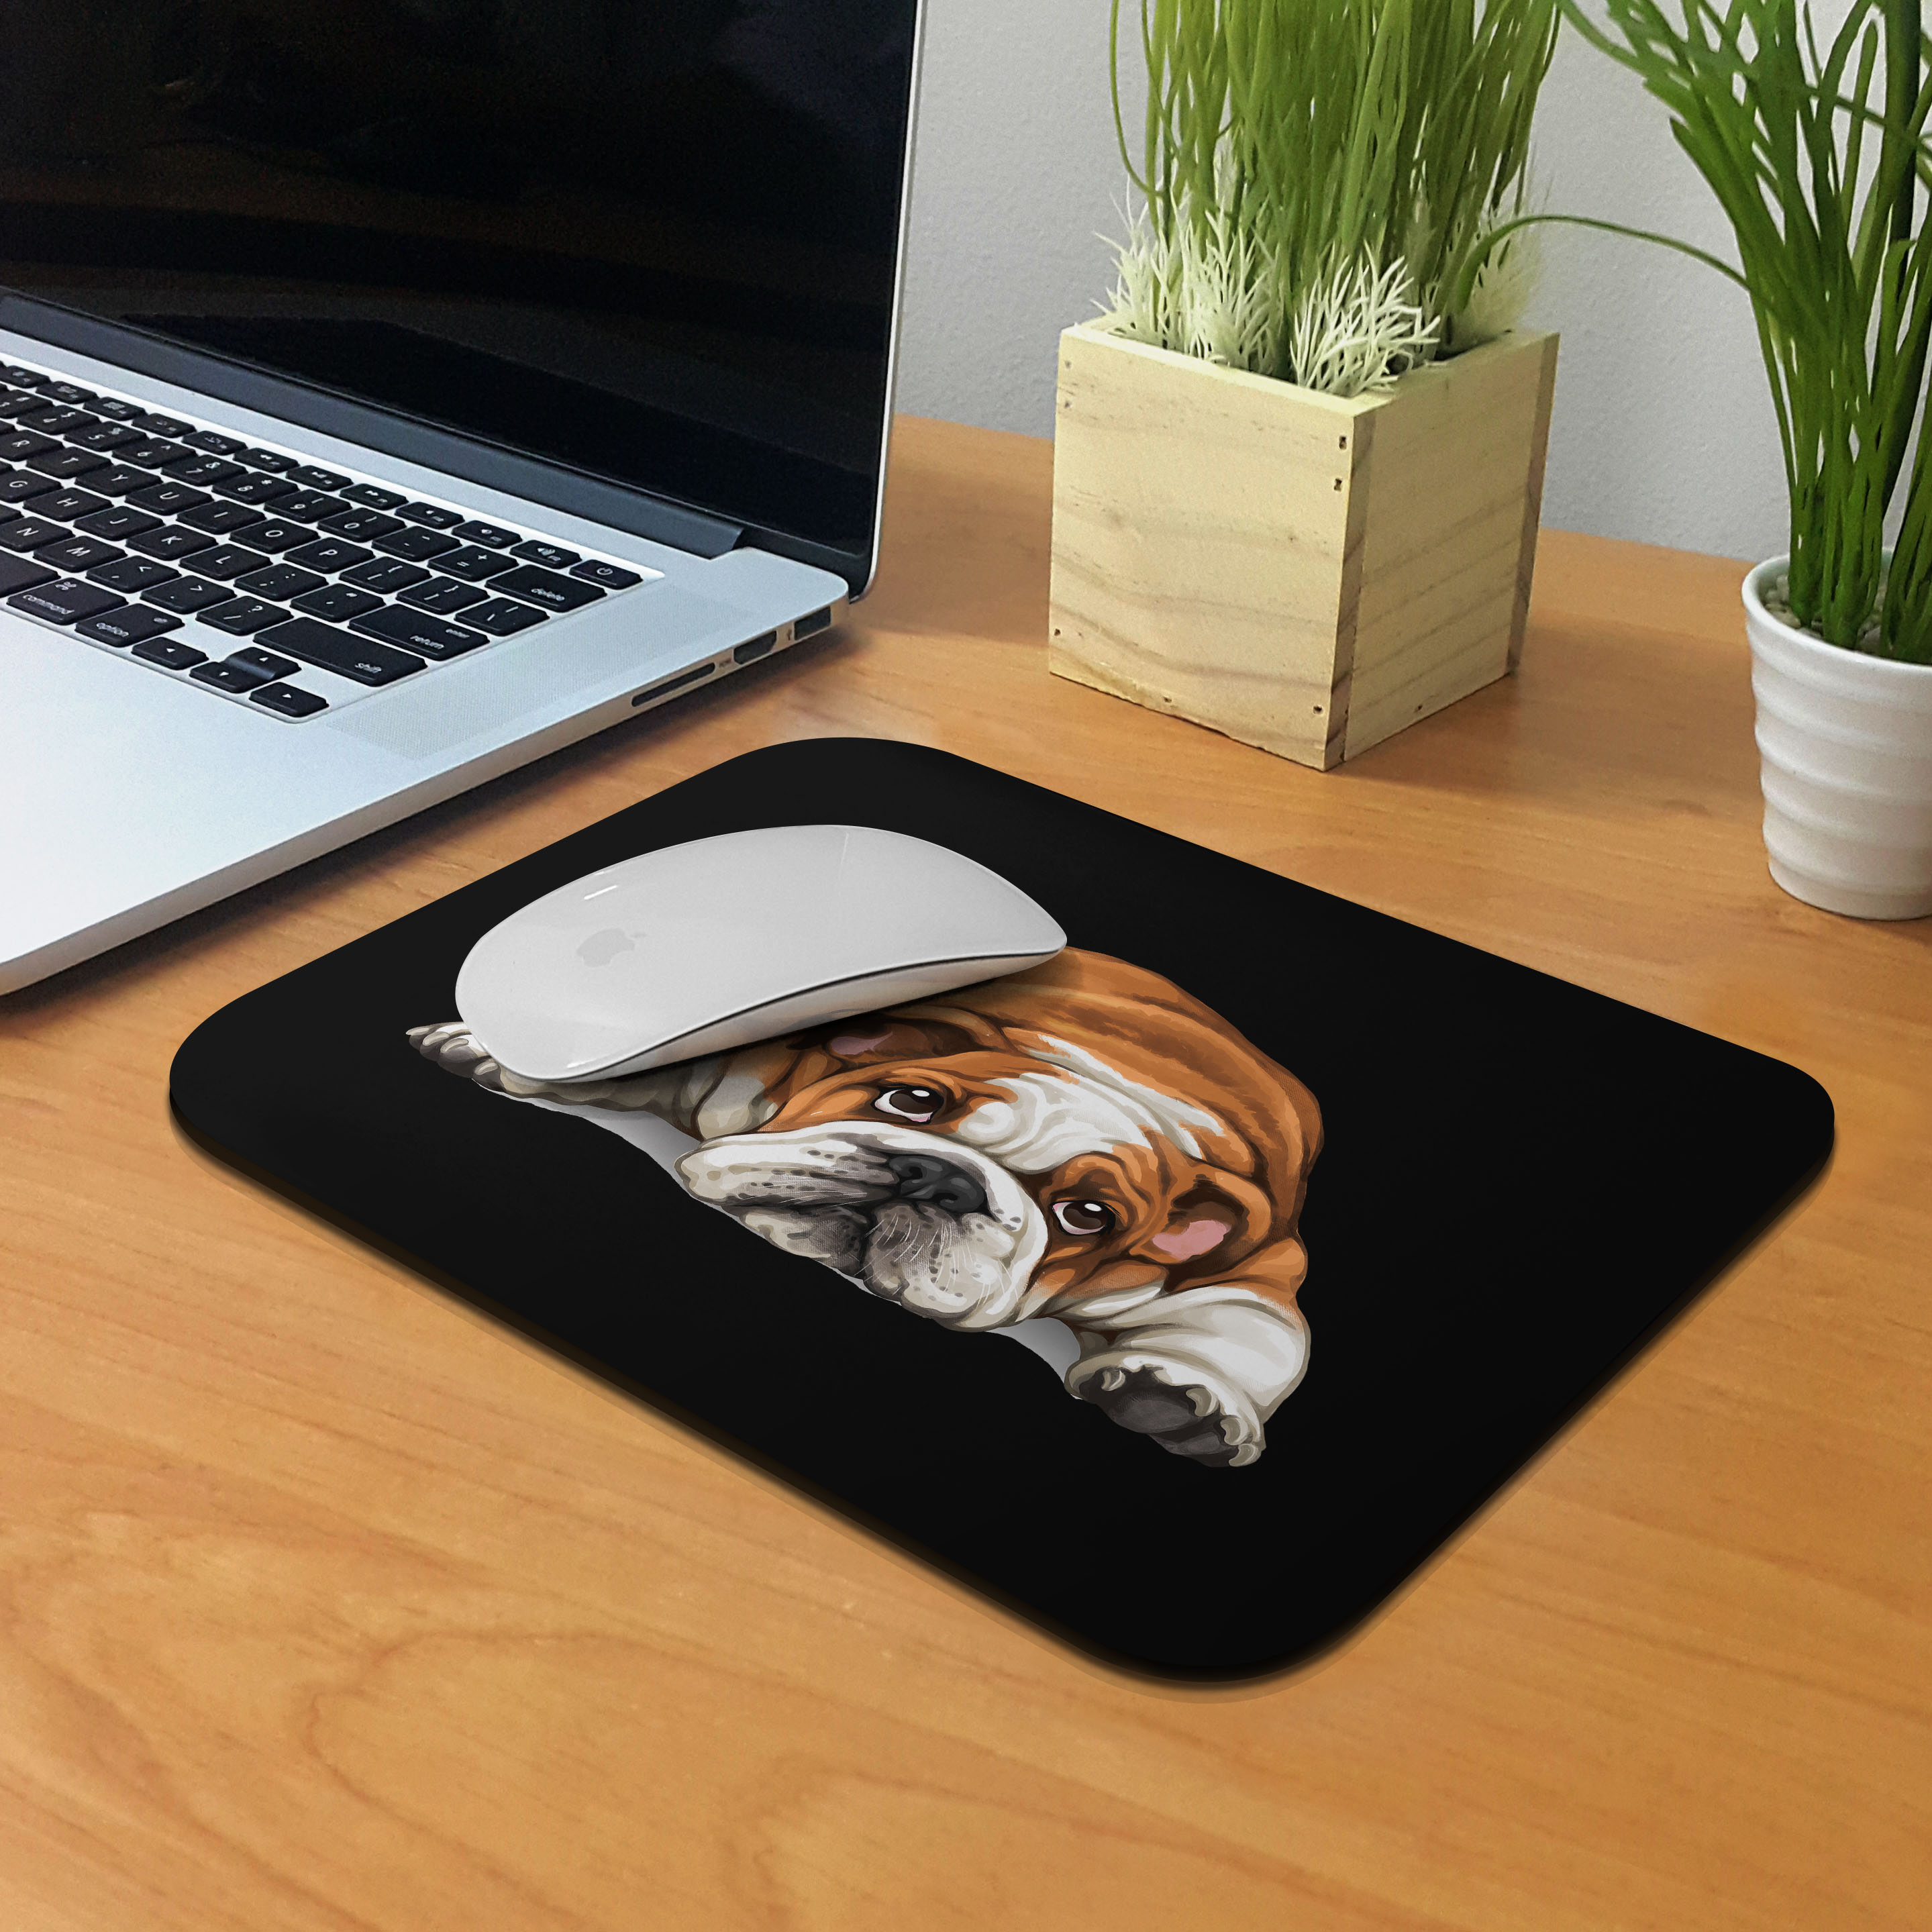 FINCIBO Rectangle Standard Mouse Pad, Non-Slip Mouse Pad for Home, Office, and Gaming Desk, English Bulldog Dog Lying Down Looking Up - image 5 of 5